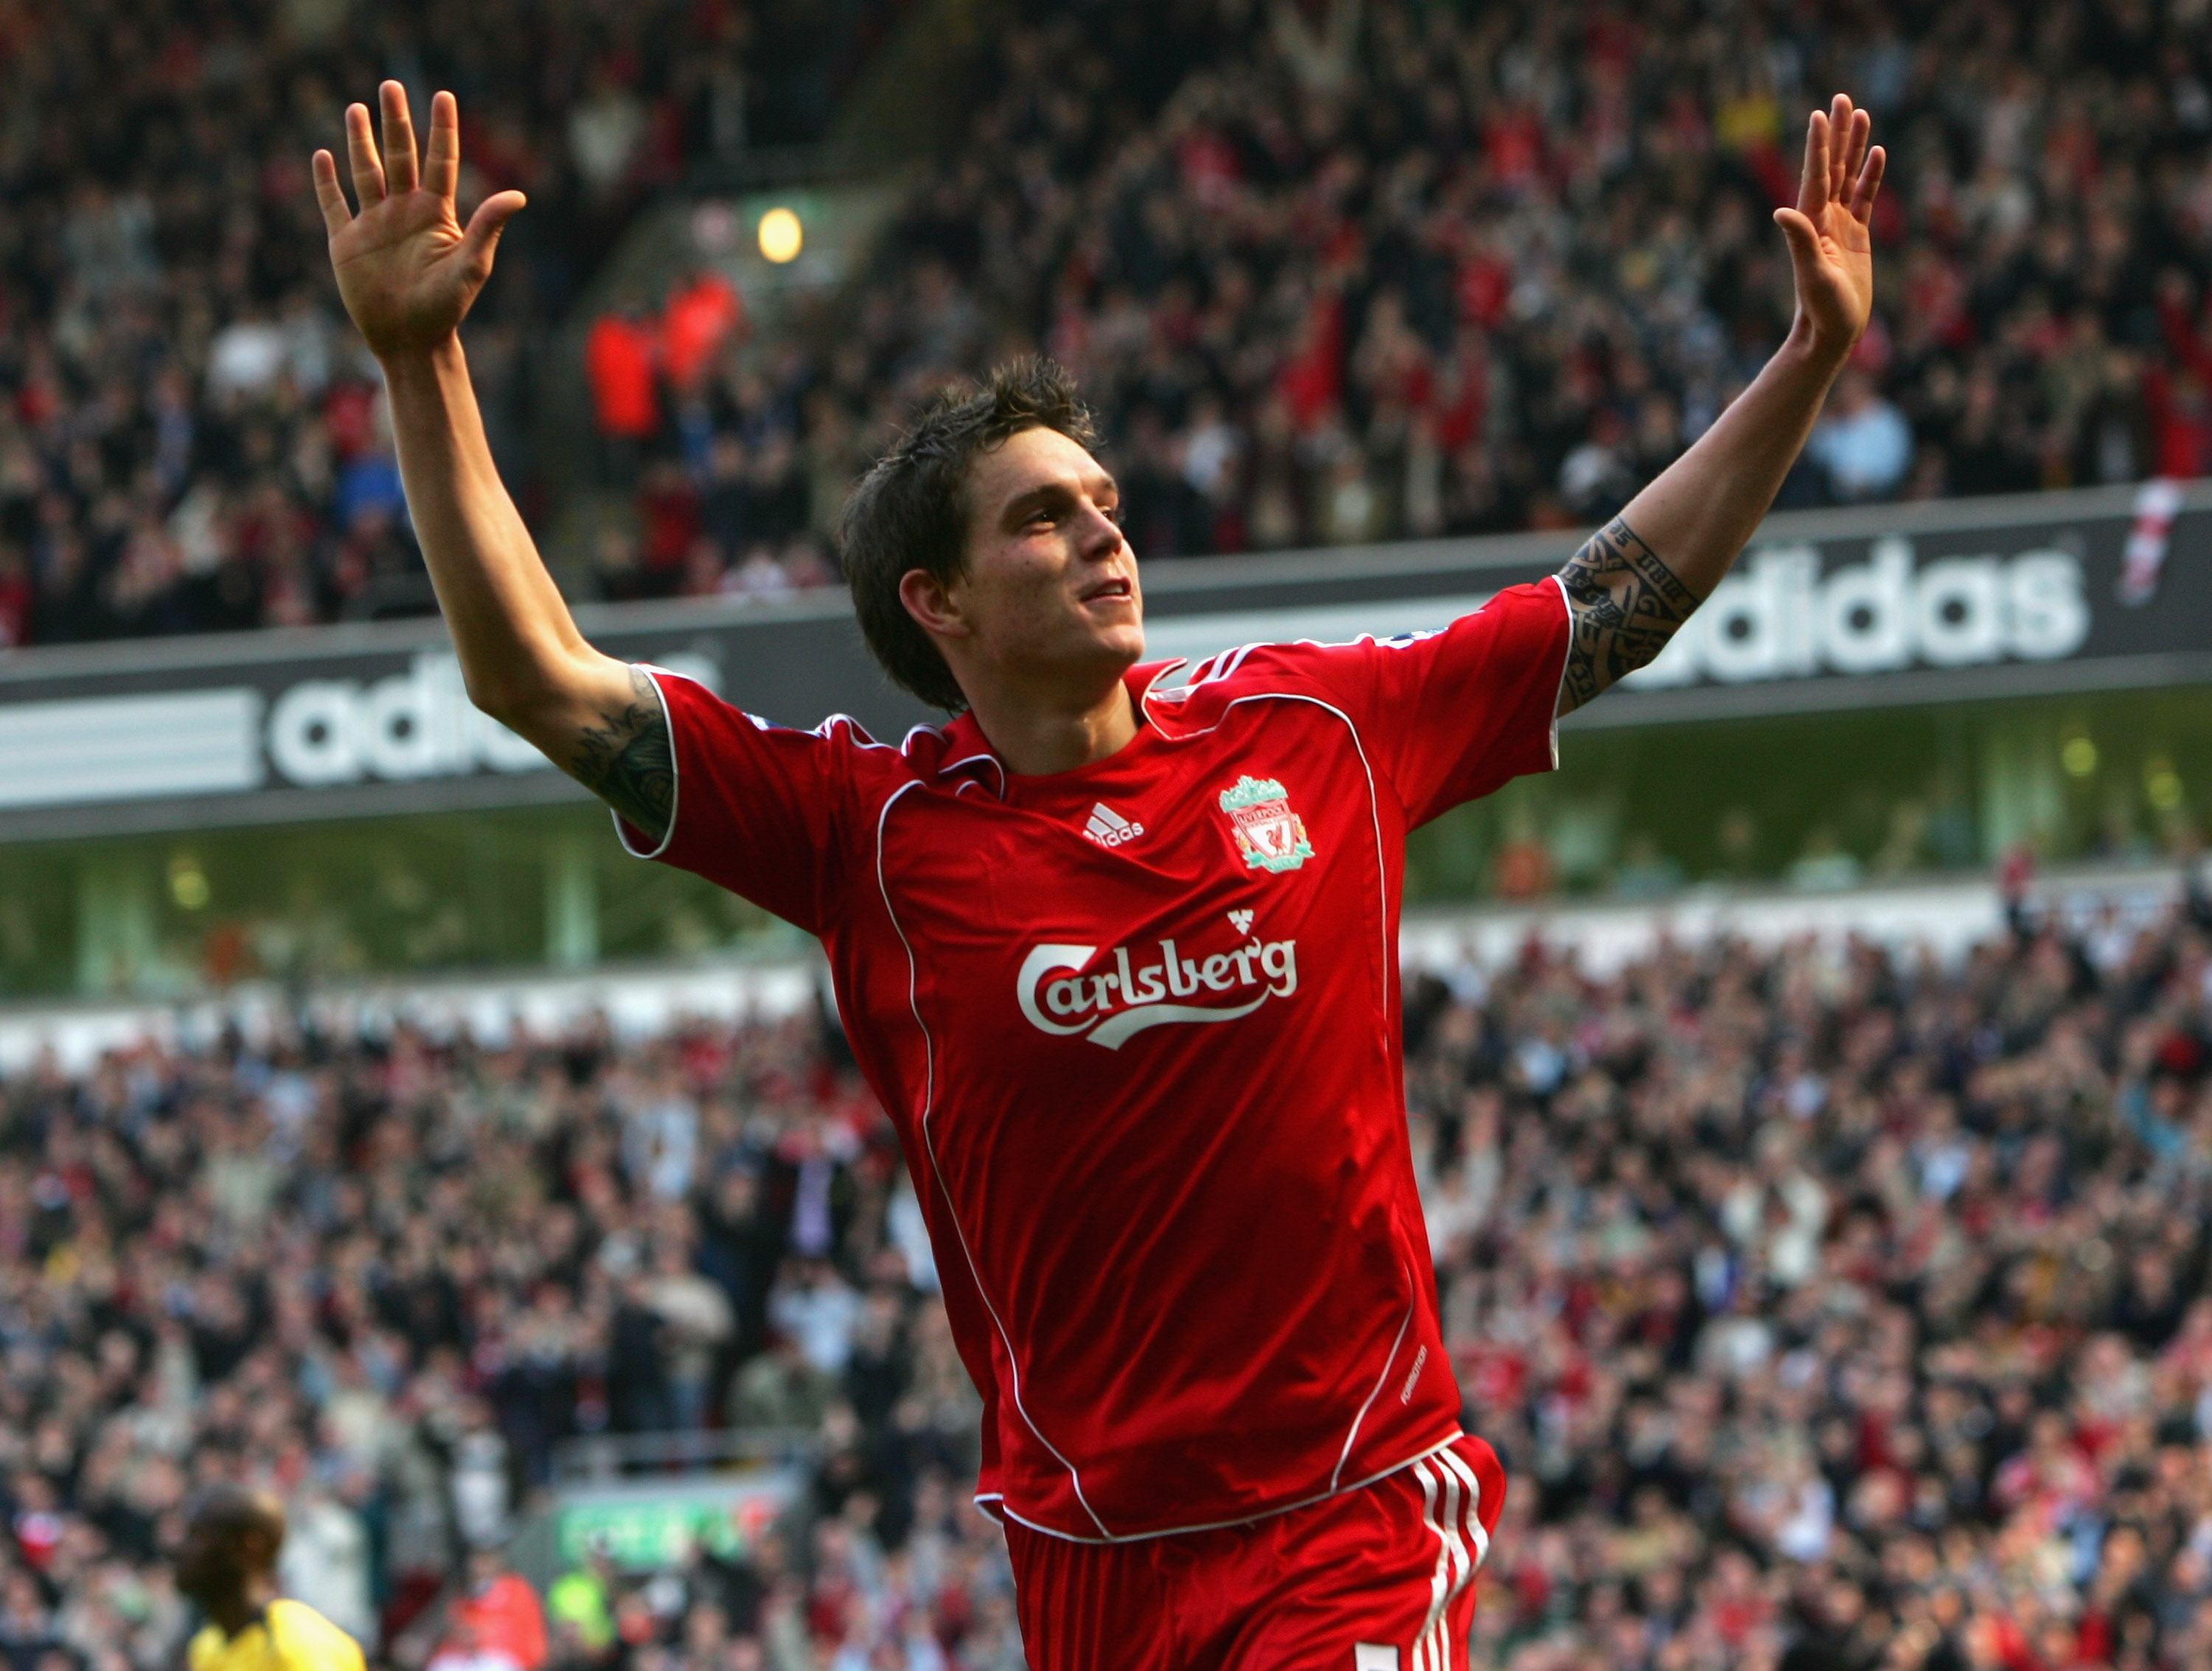 LIVERPOOL, UNITED KINGDOM - MARCH 31:  Daniel Agger of Liverpool celebrates scoring his team's third goal during the Barclays Premiership match between Liverpool and Arsenal at Anfield on March 31, 2007 in Liverpool, England.  (Photo by Alex Livesey/Getty